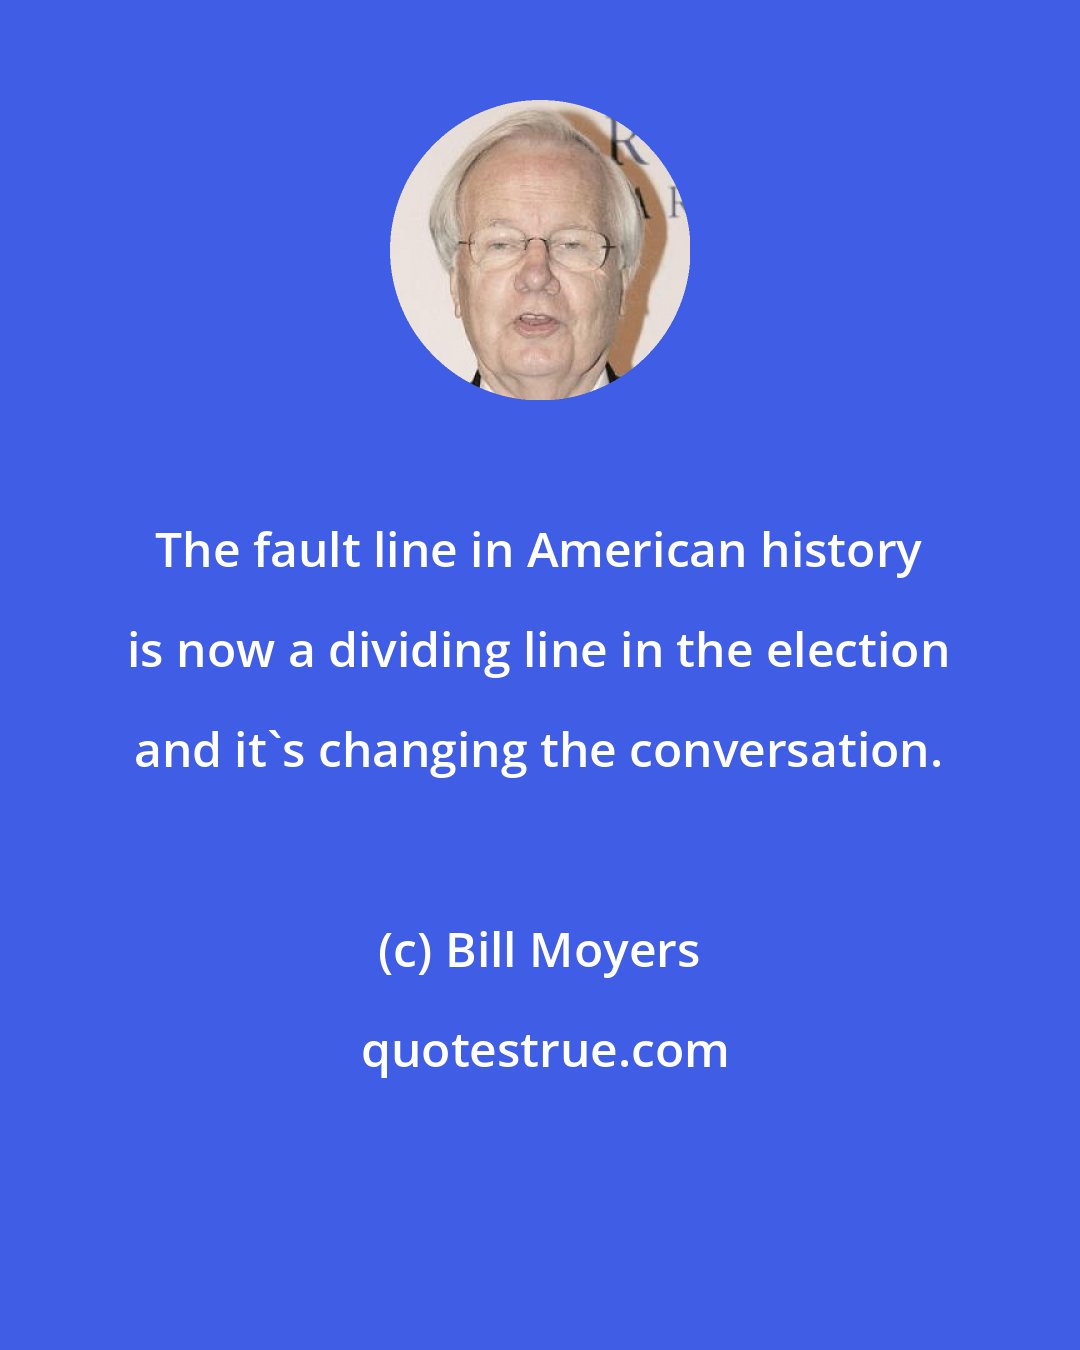 Bill Moyers: The fault line in American history is now a dividing line in the election and it's changing the conversation.